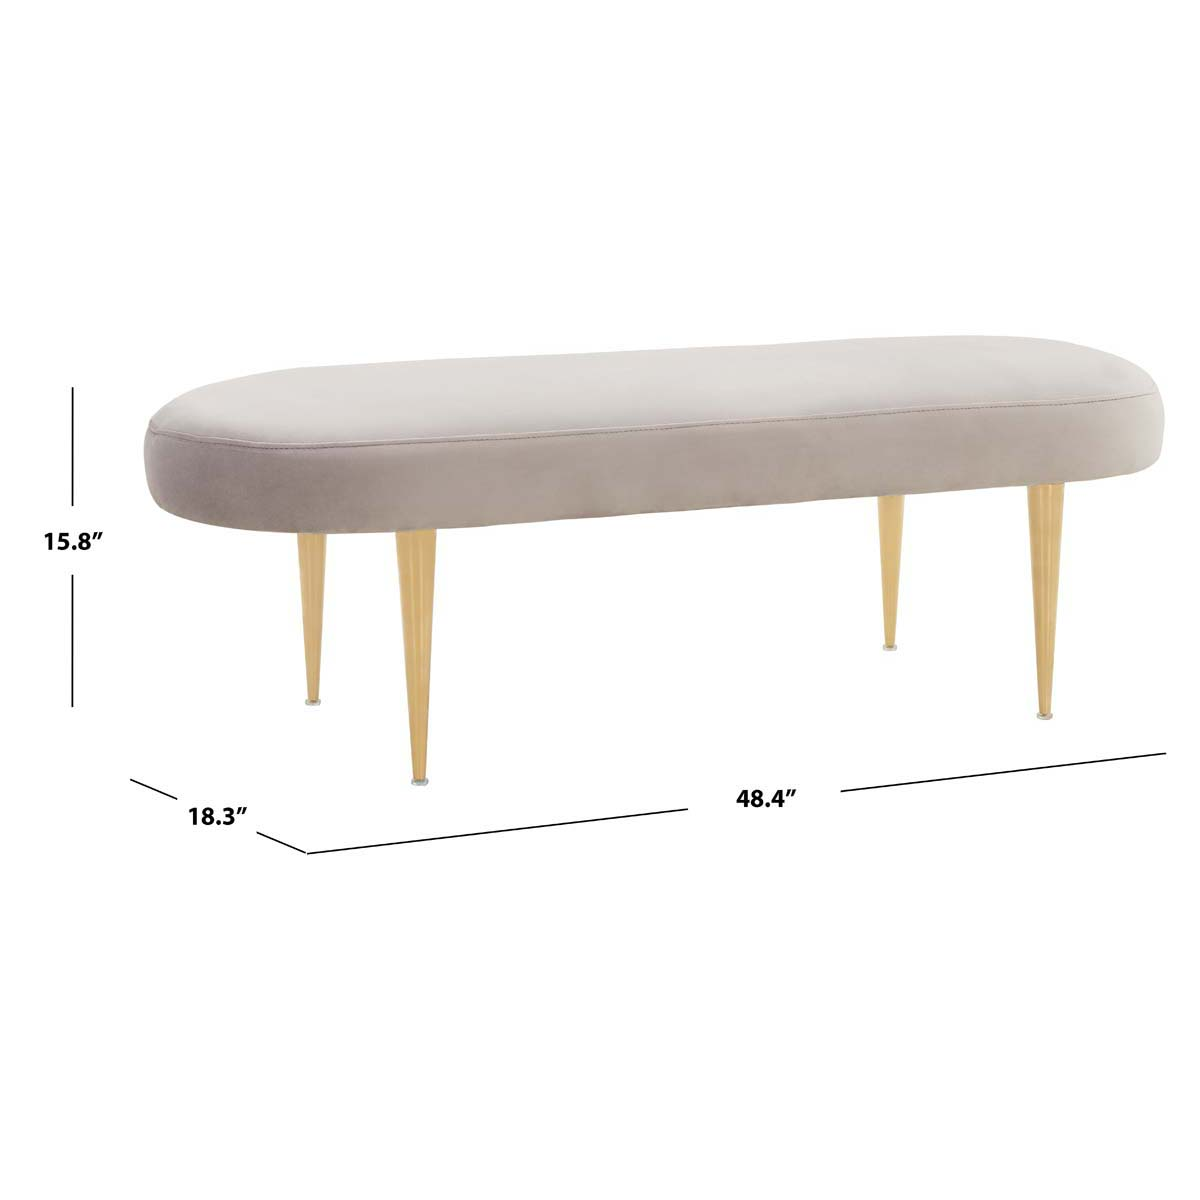 Safavieh Couture Corinne Oval Bench - Pale Taupe